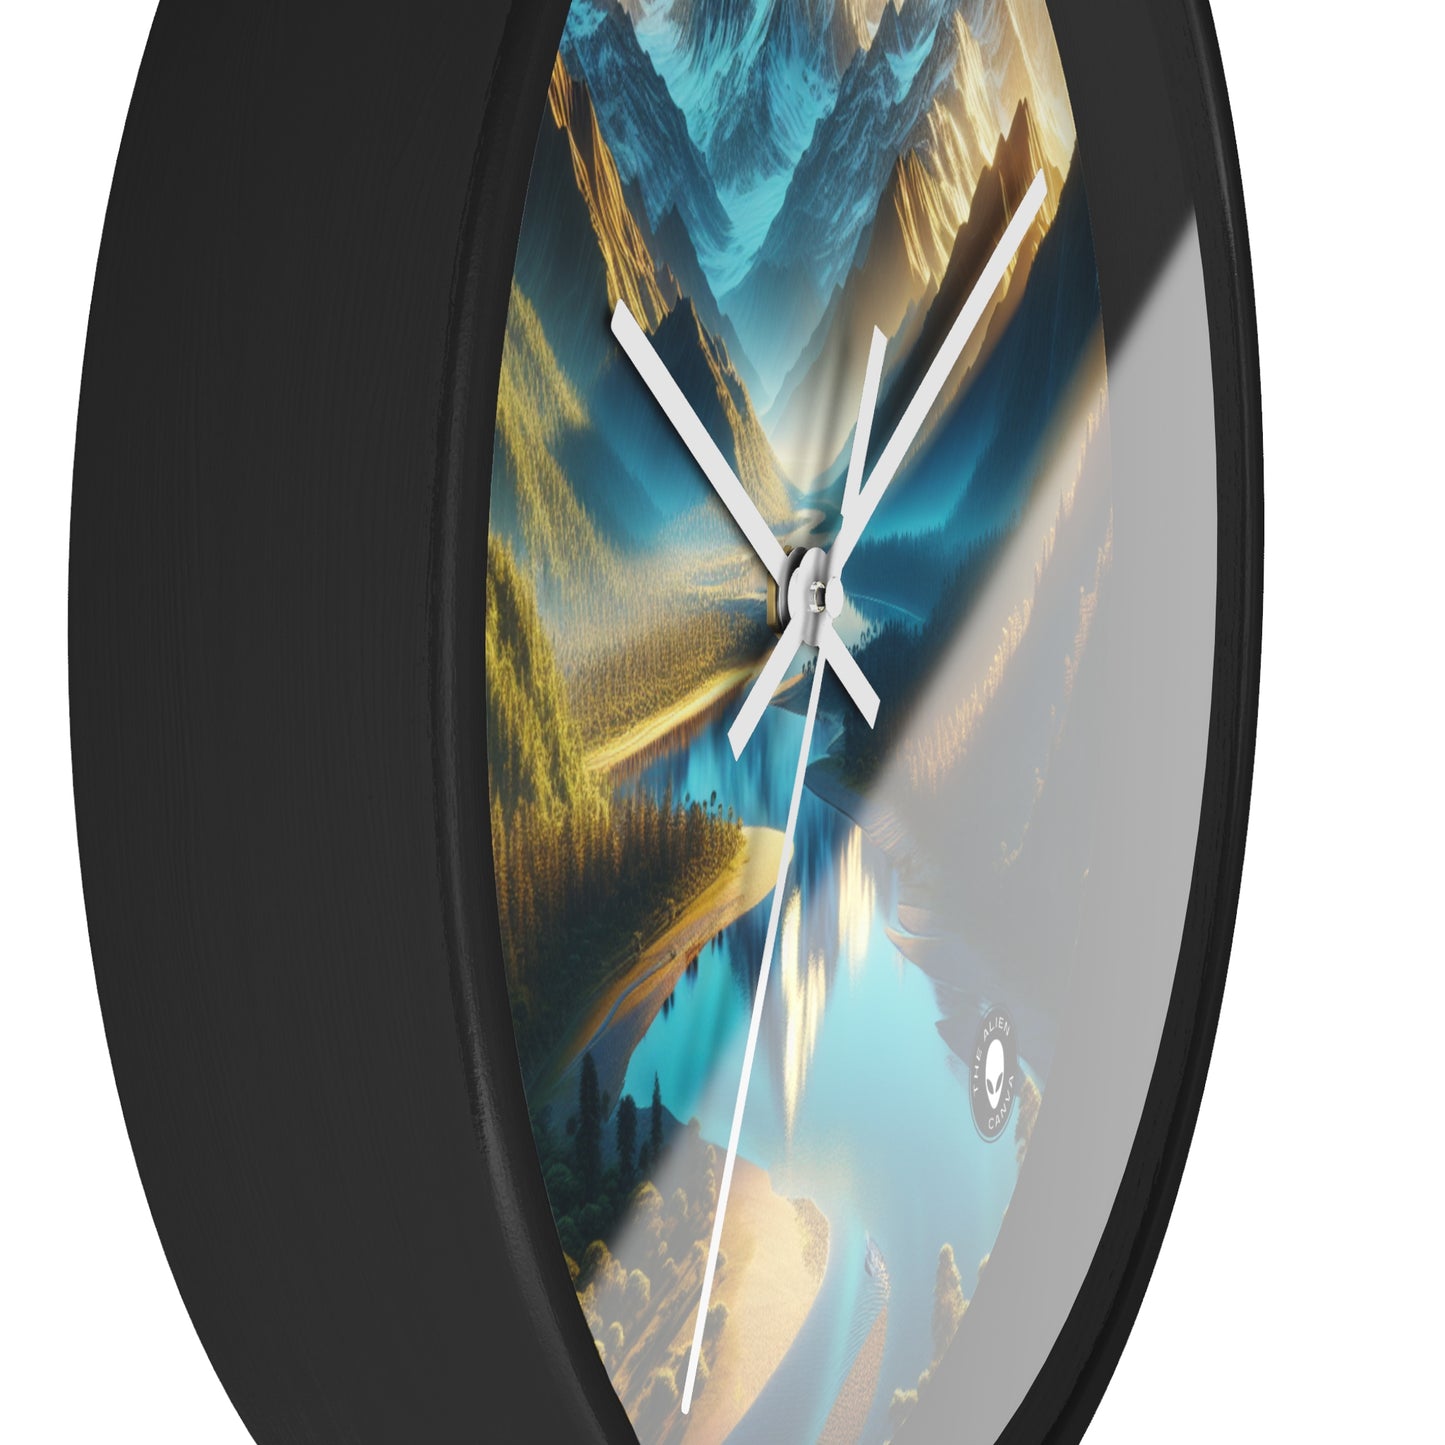 "Serenity's Palette: A Sunset Symphony" - The Alien Wall Clock Photorealism